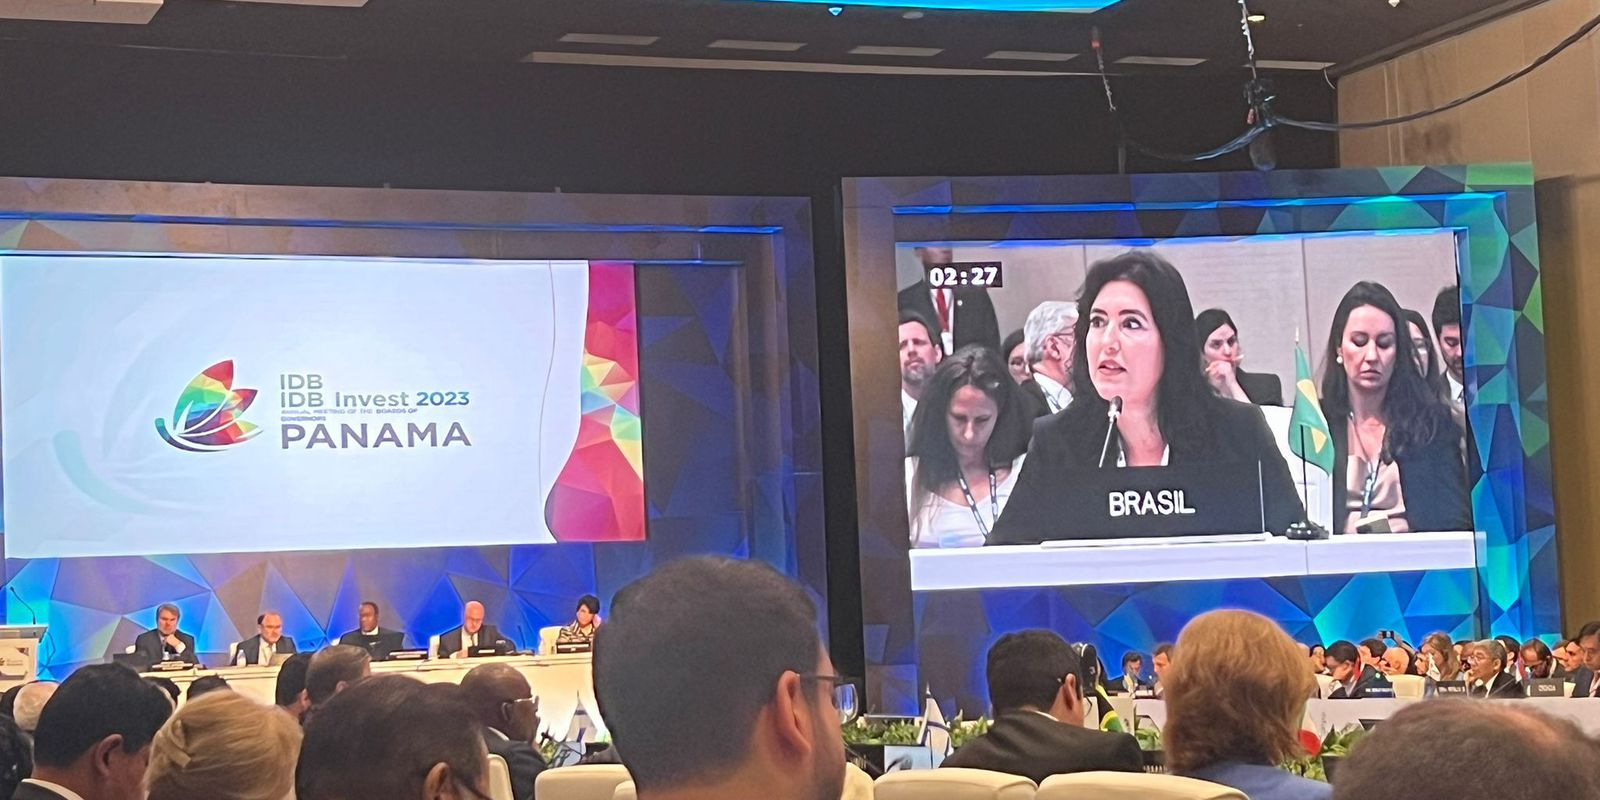 Brazil reaffirms commitment to social policies at IDB meeting